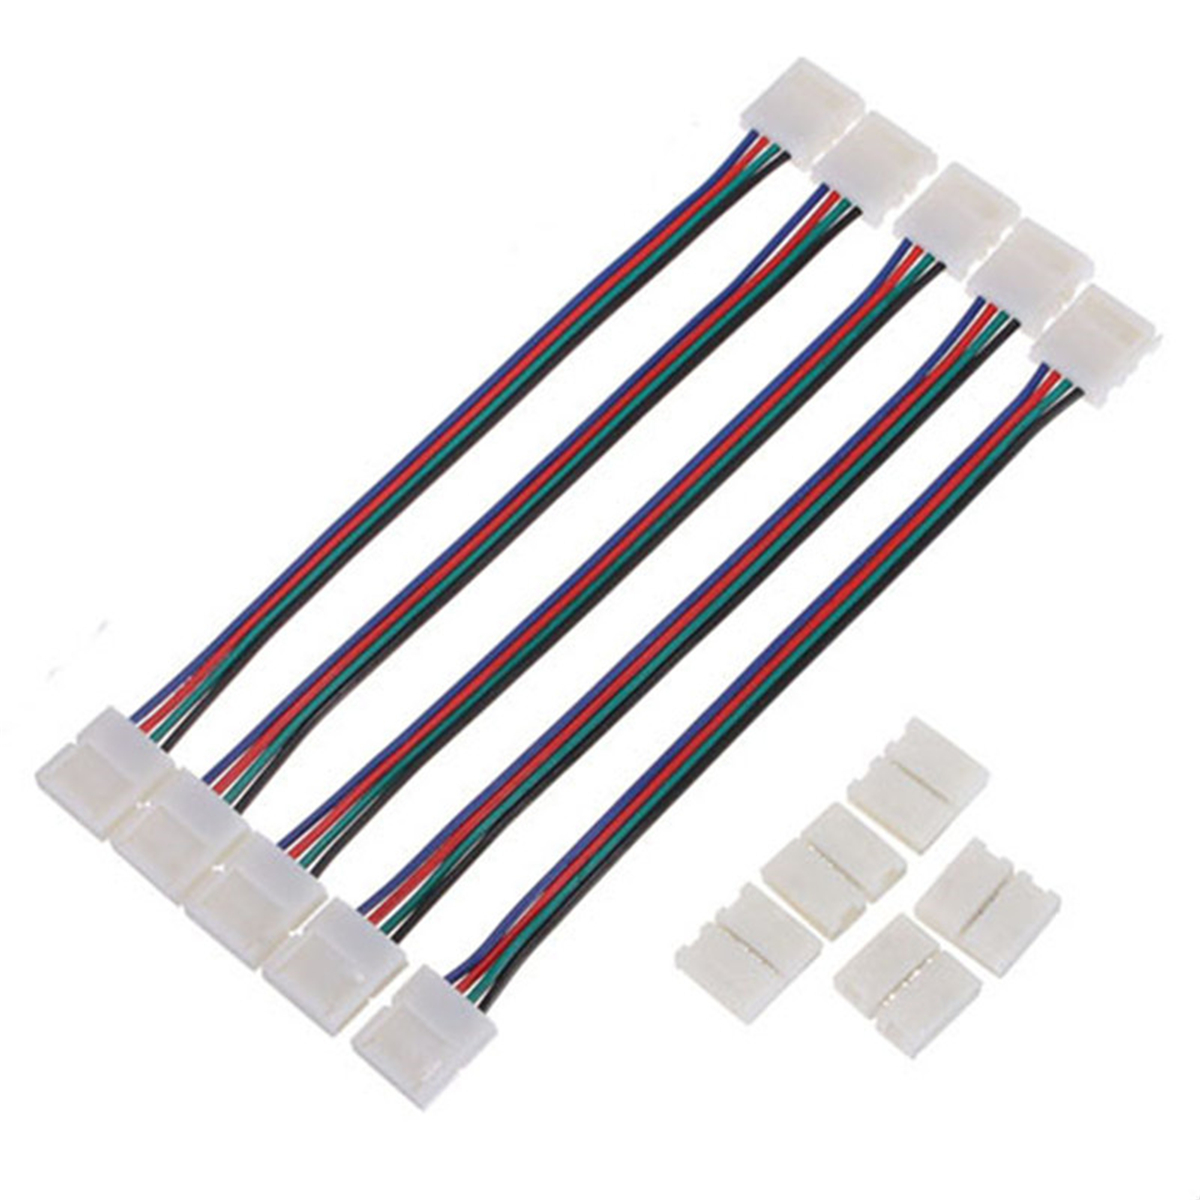 

5pcs 8mm 4pin SMD 3528 Double Head Connector Cable For RGB LED Strip Light Lamp